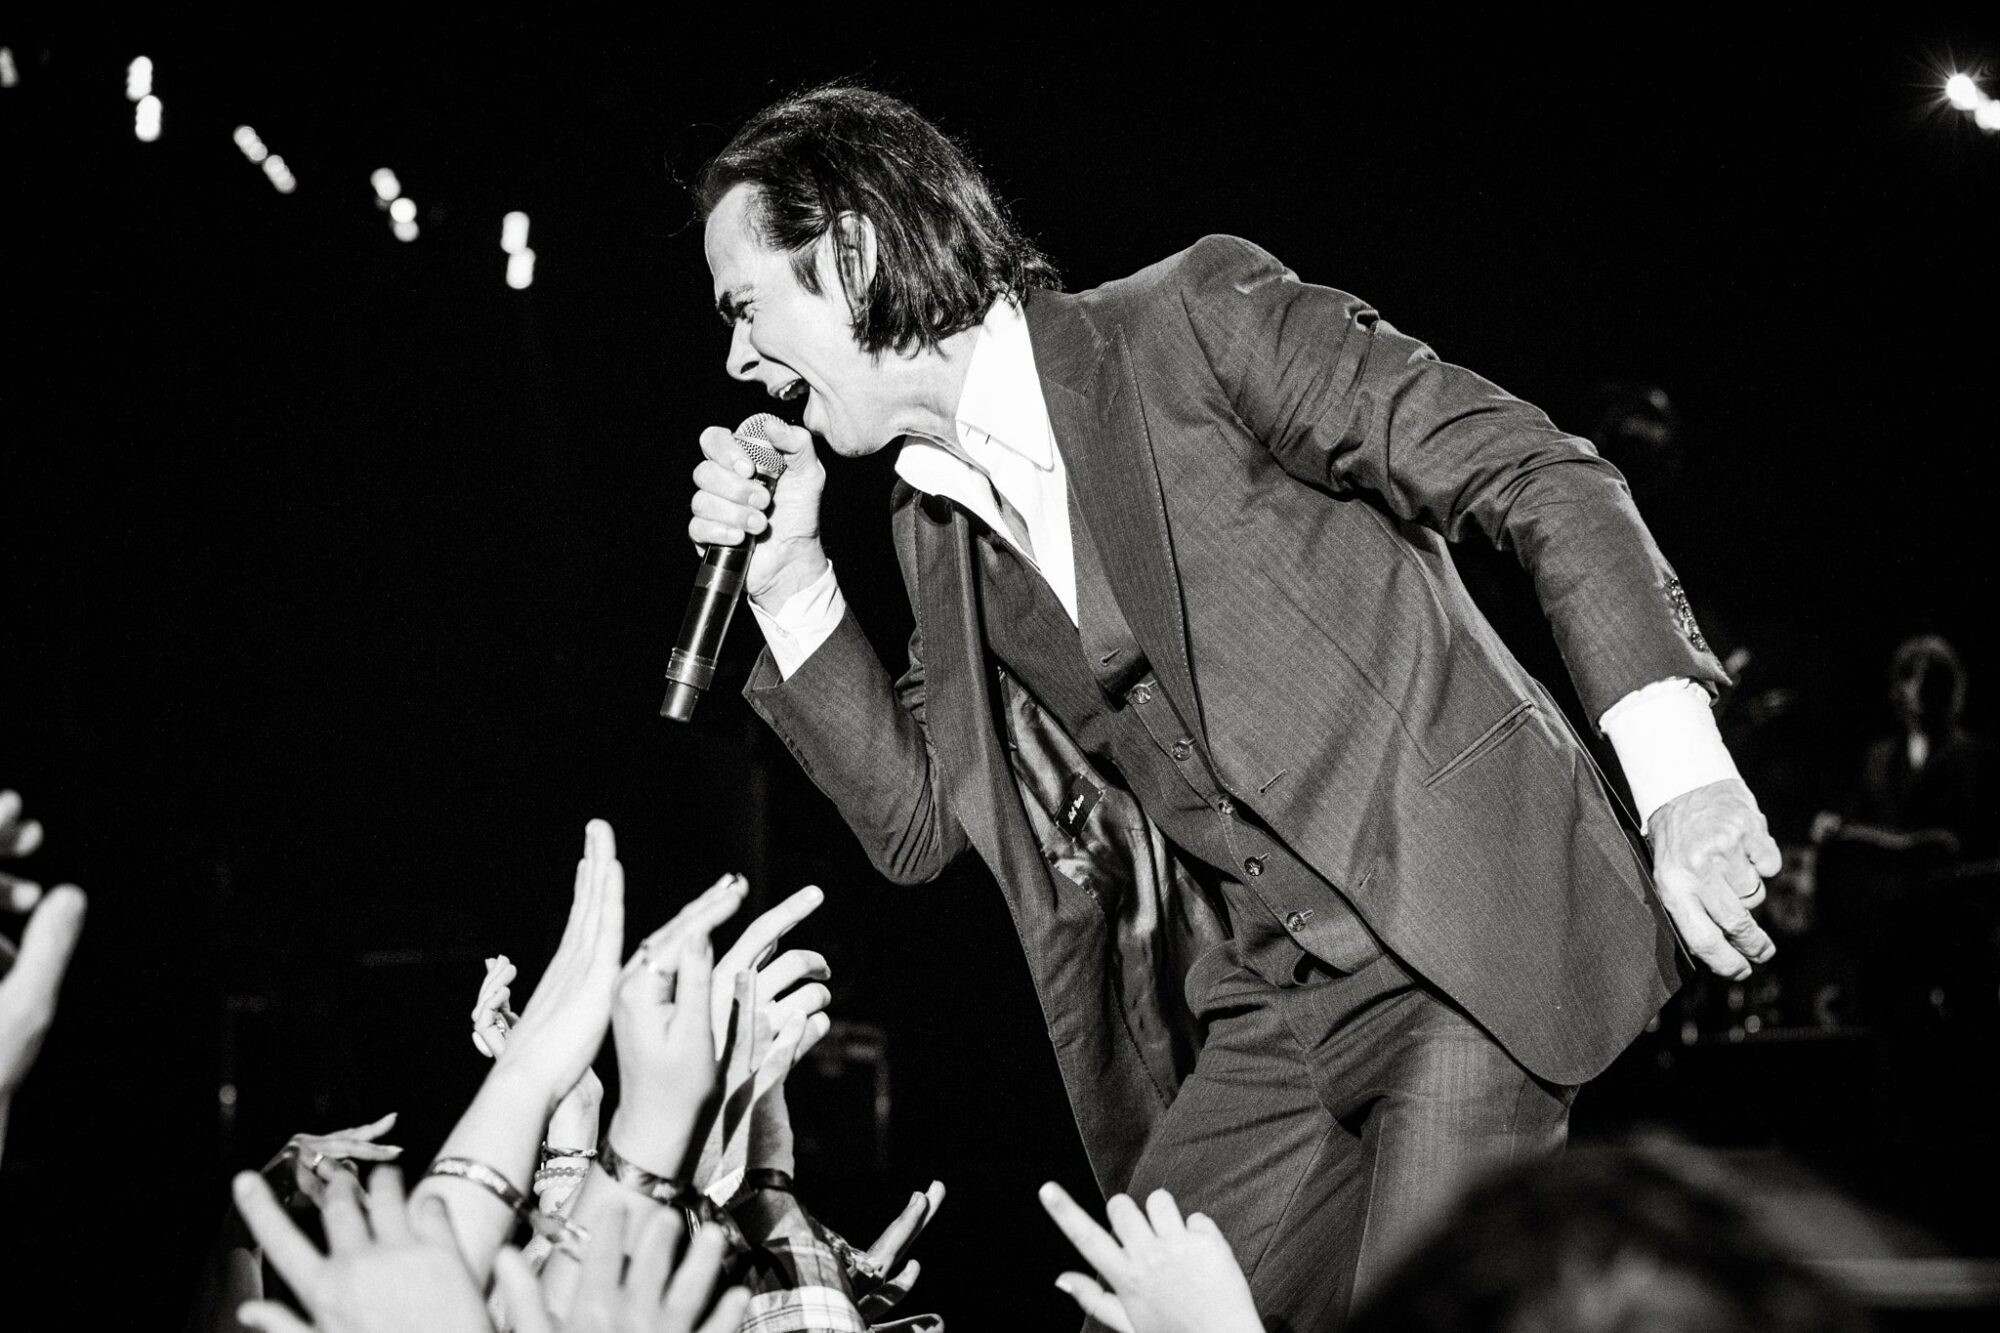 Image name Nick Cave Premium Package The Luxury Experience at First Direct Arena Leeds the 1 image from the post Nick Cave - Premium Package - Suites at First Direct Arena, Leeds in Yorkshire.com.